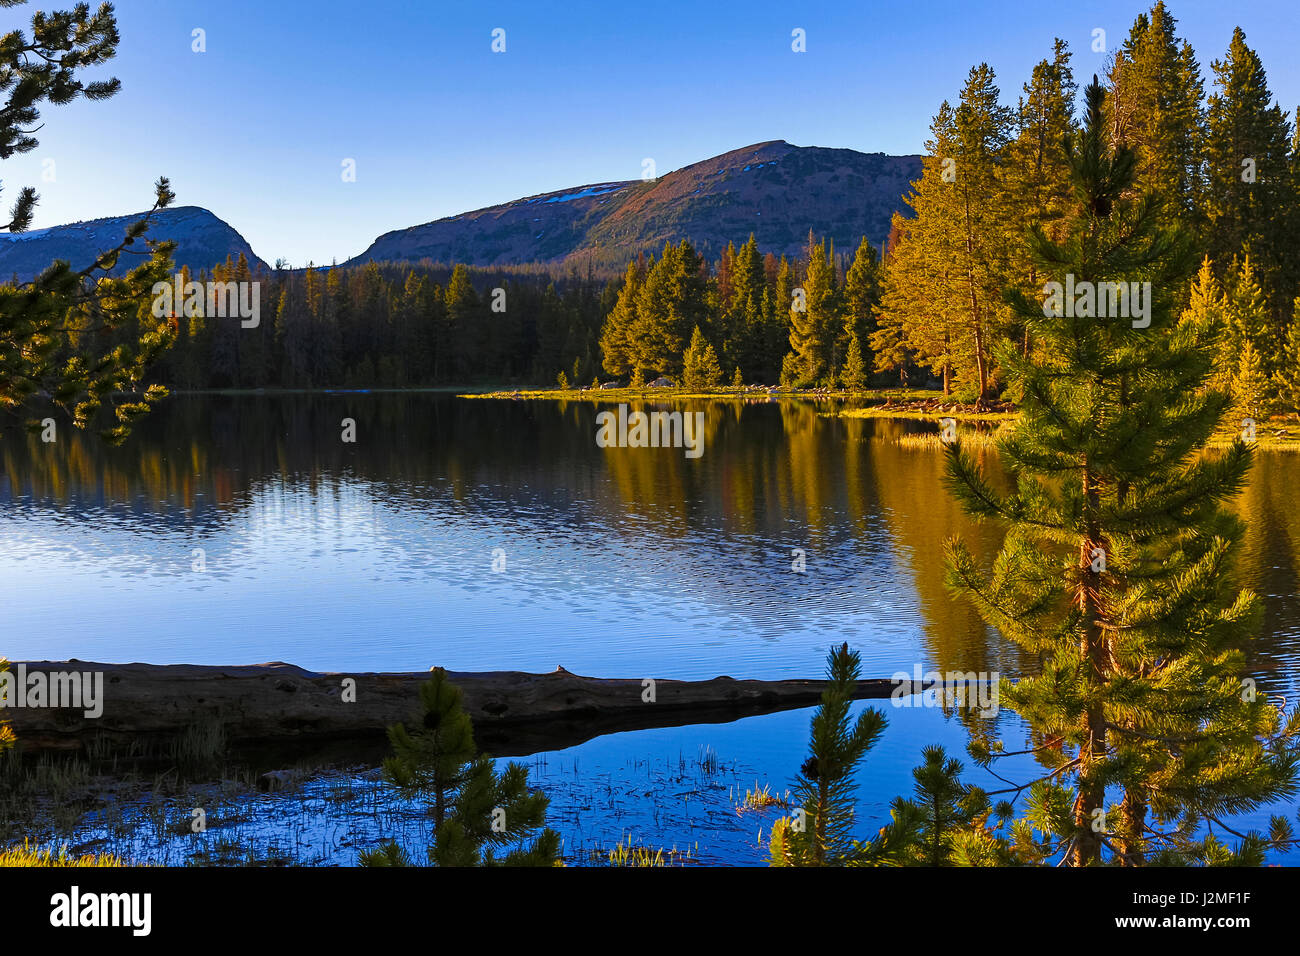 A late-afternoon view of Teapot Lake in the Uinta Mountains of northern Utah.  This picturesque lake is located along the Mirror Lake Scenic Byway. Stock Photo